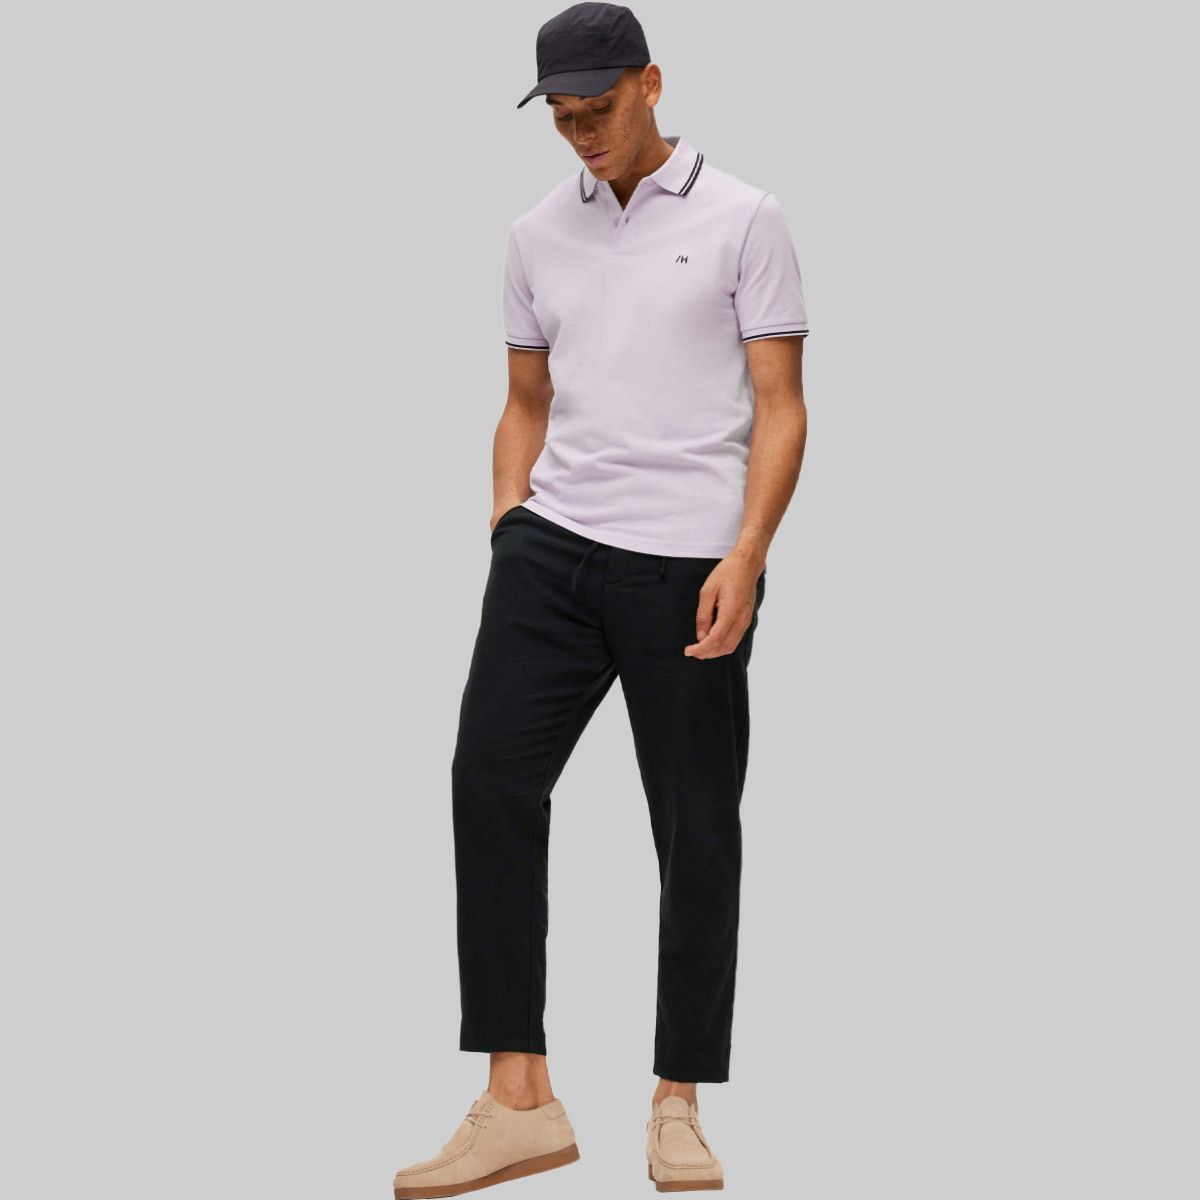 Blend Tapered Trousers